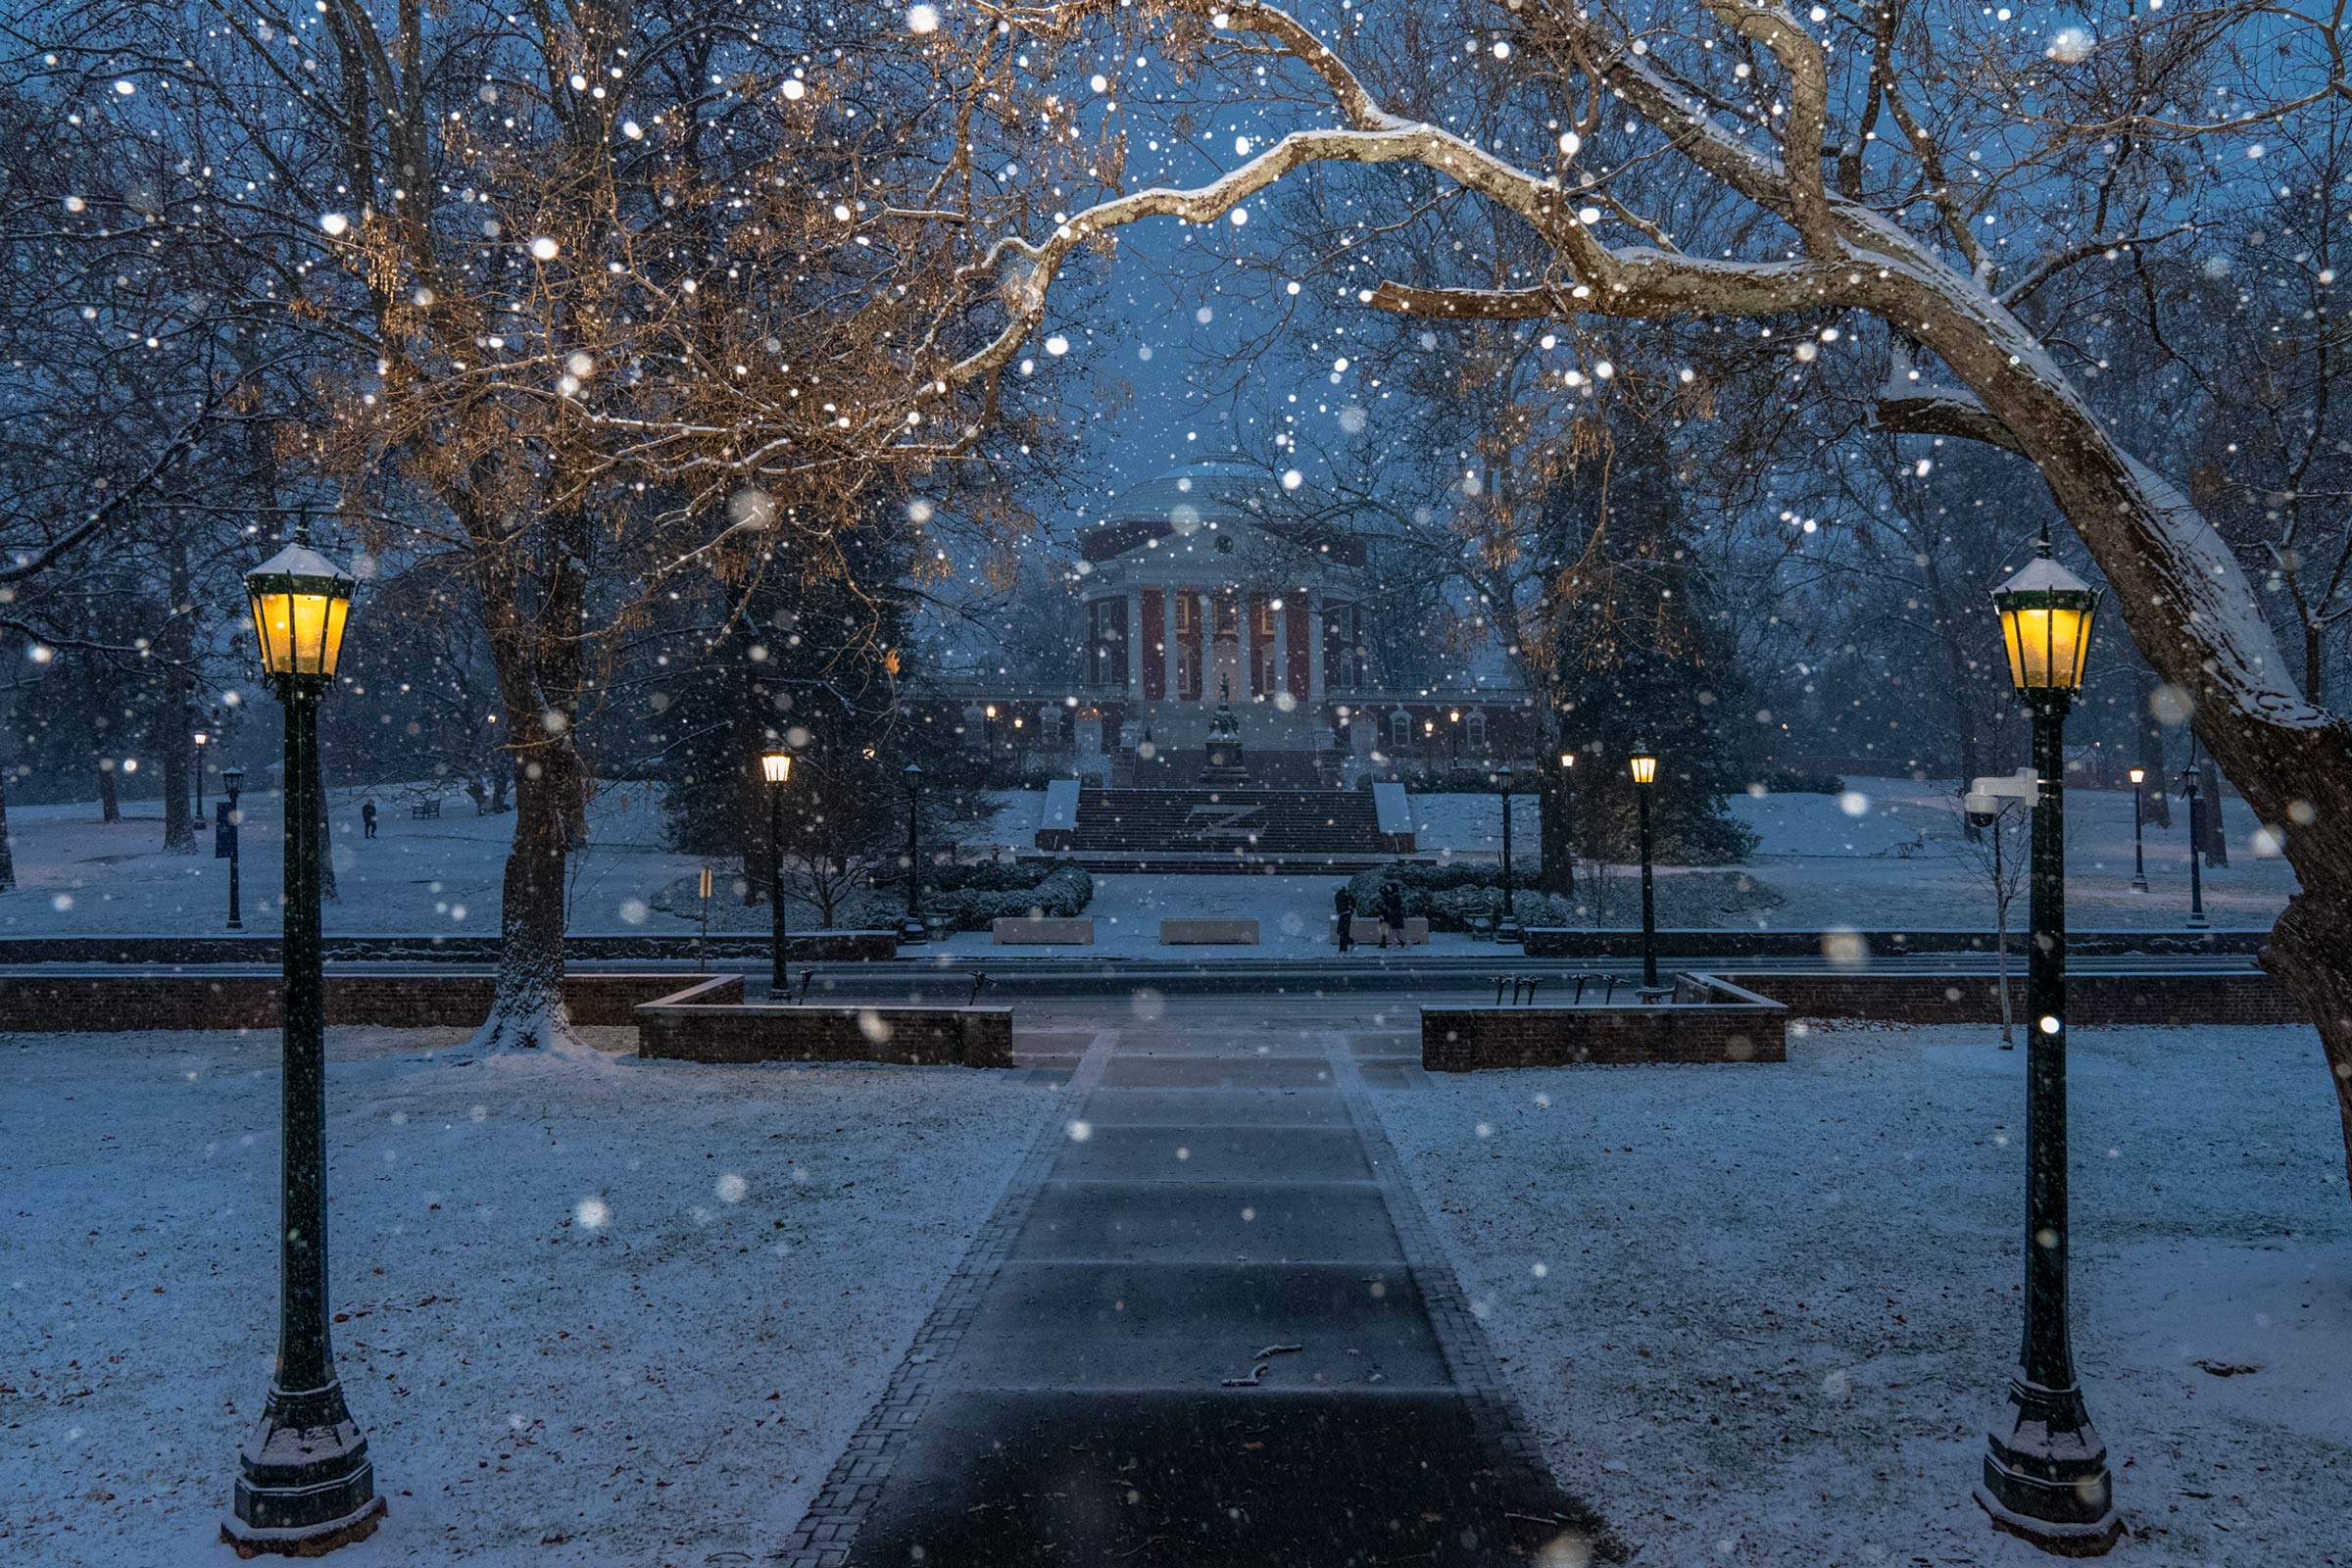 Snow falling in front of the Rotunda